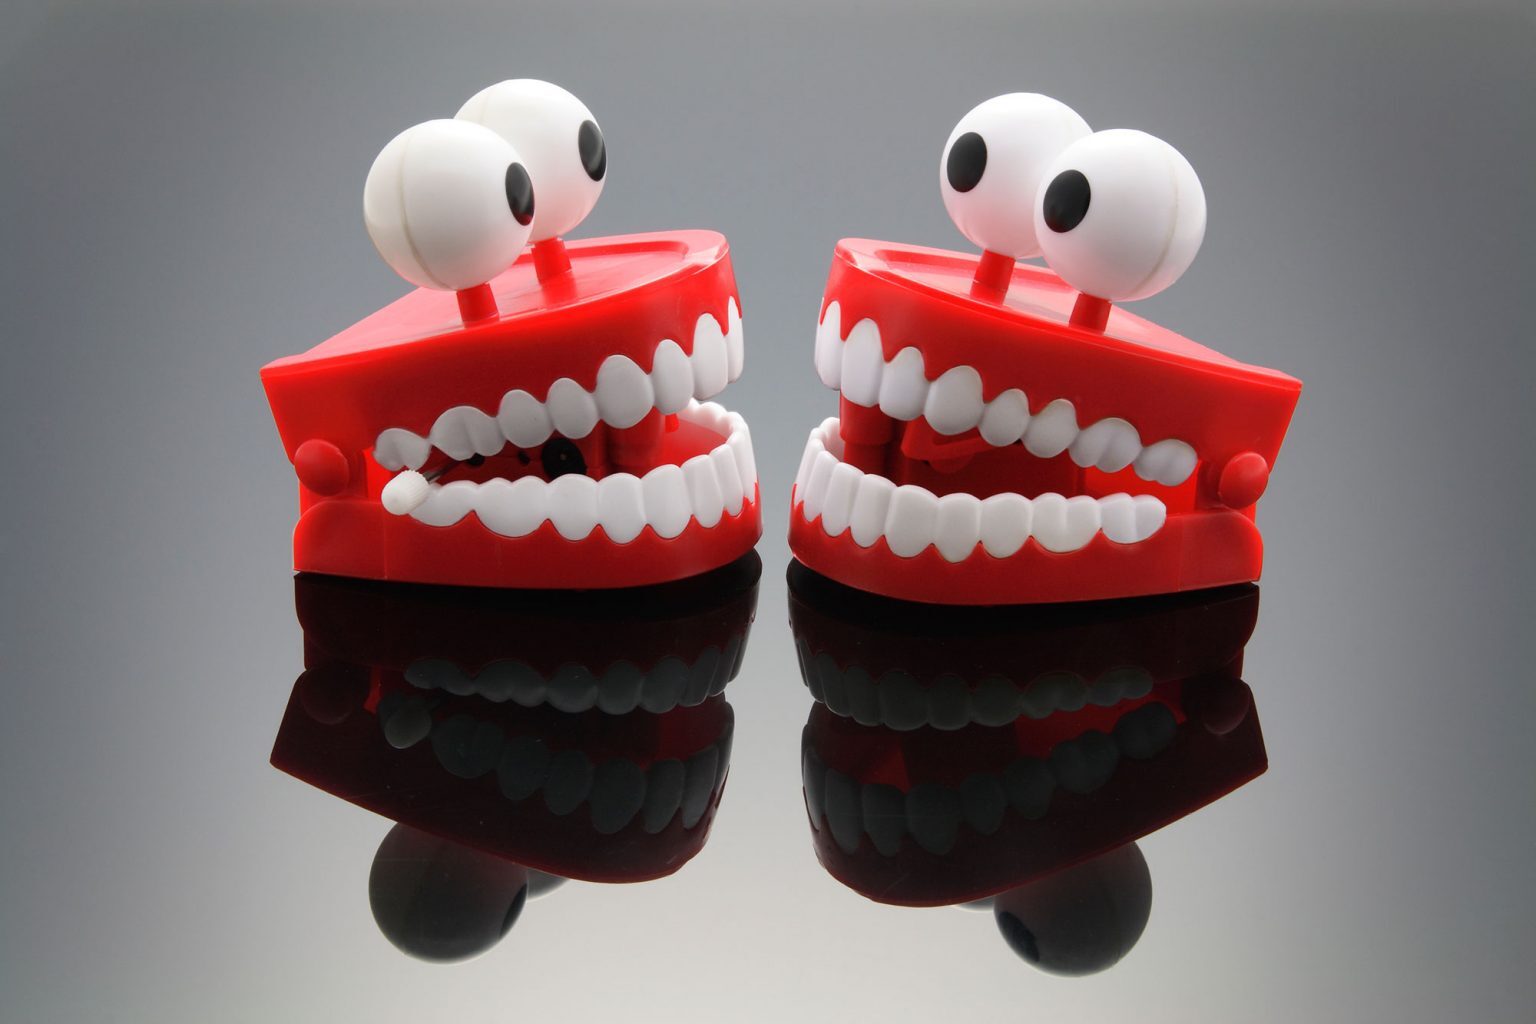 Facts About Teeth That Will Shock You